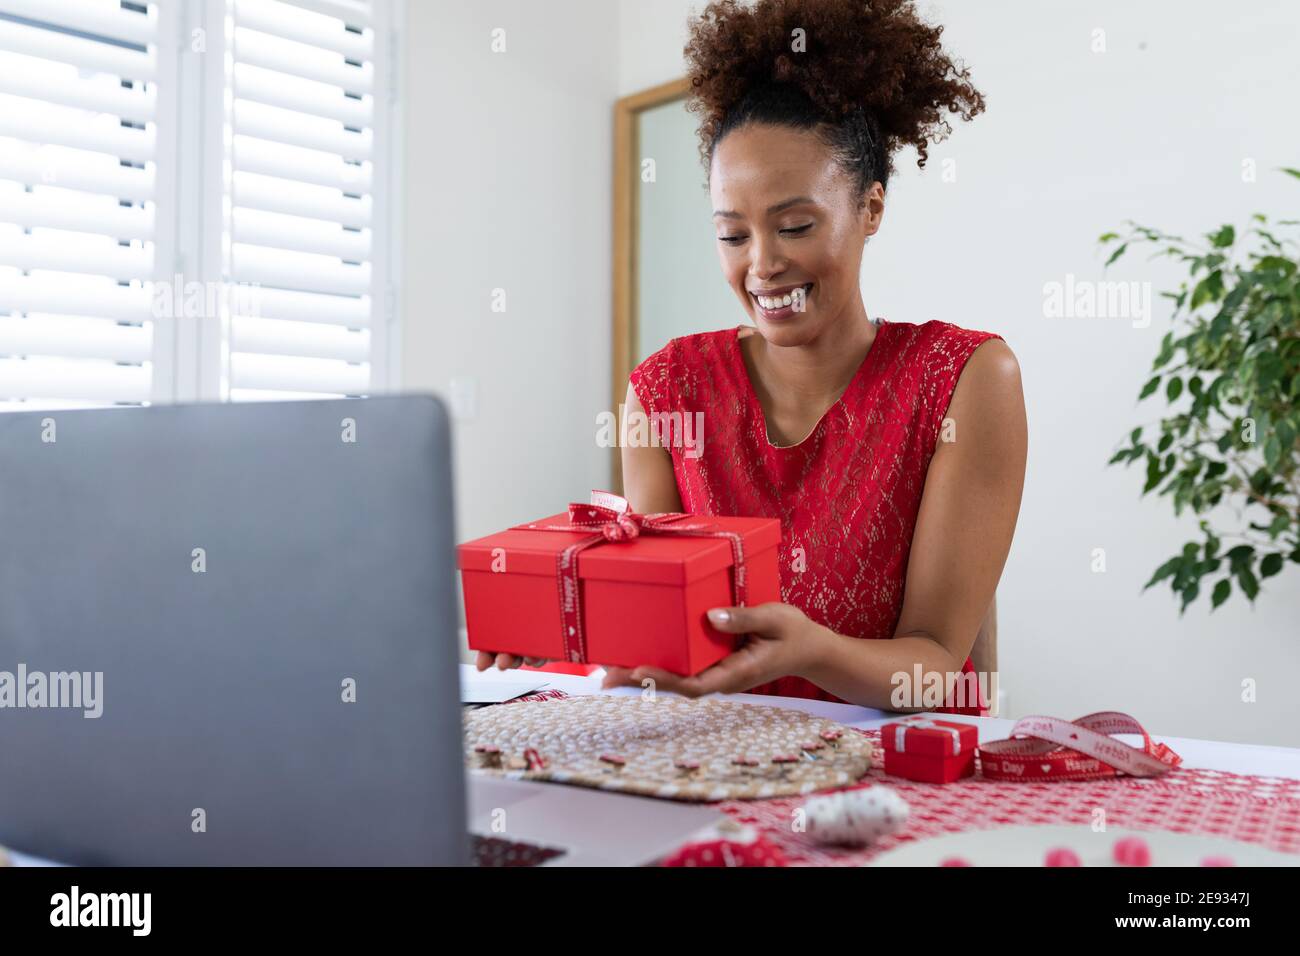 African american woman holding gift box on videocall on laptop at home Stock Photo